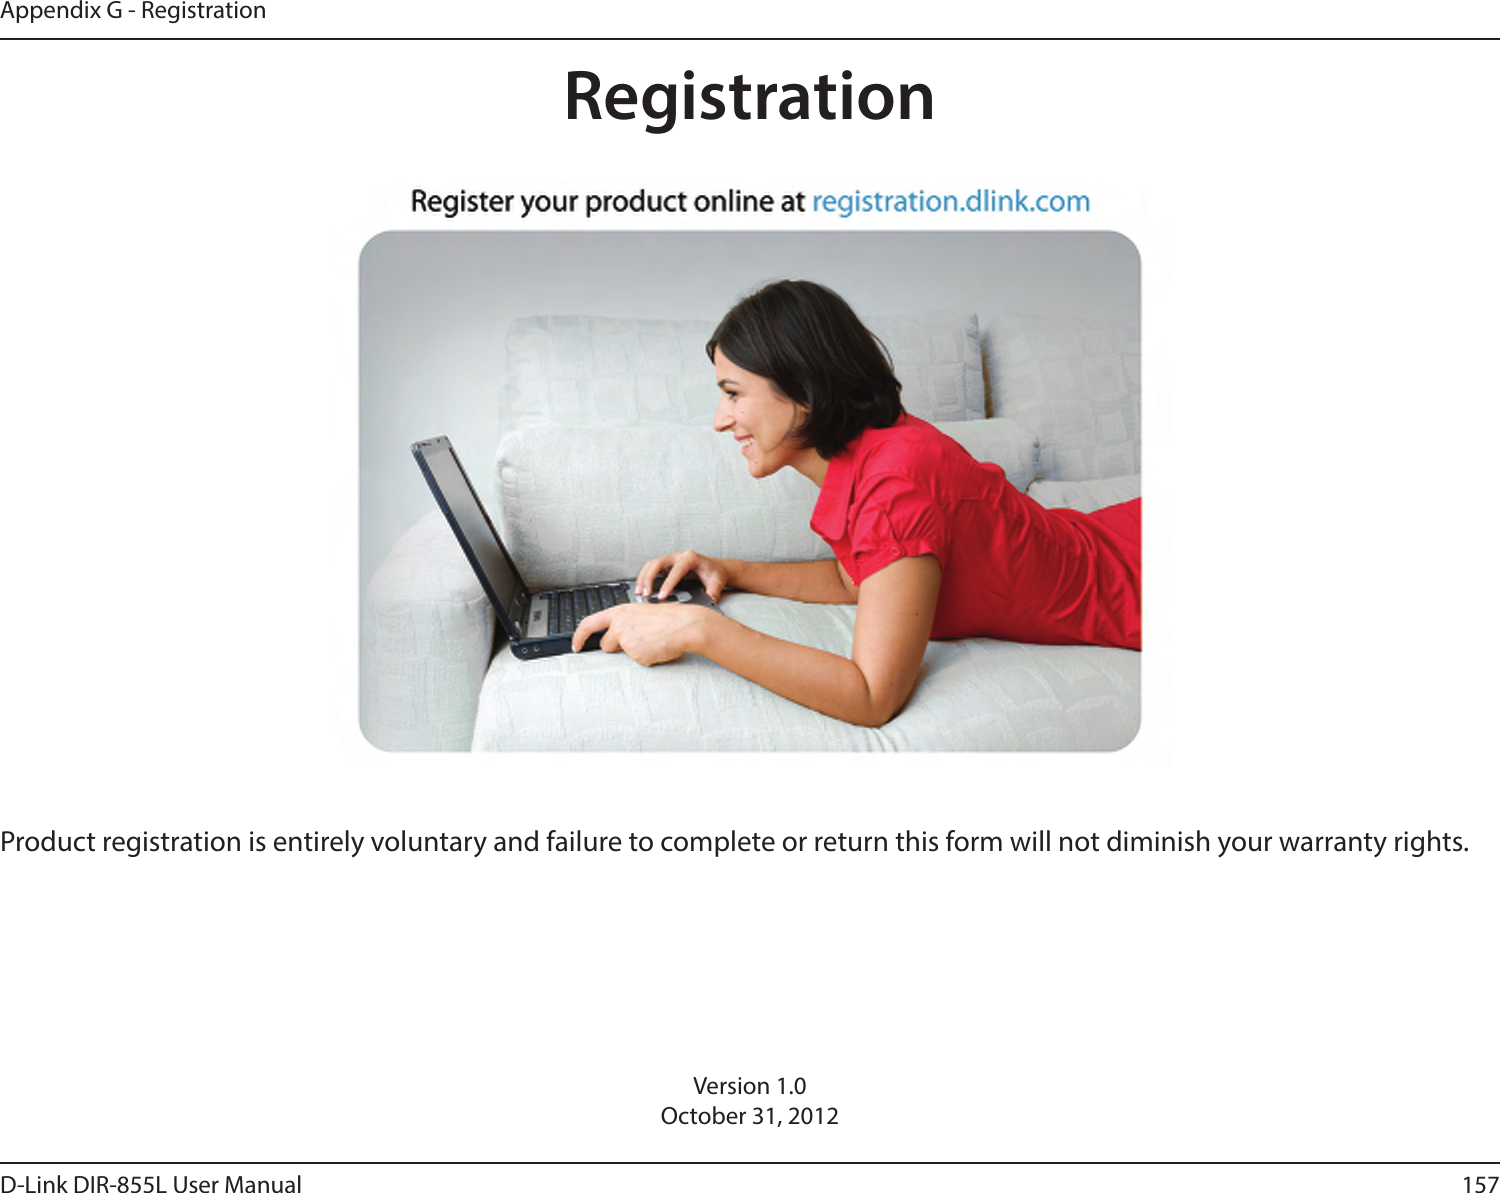 157D-Link DIR-855L User ManualAppendix G - RegistrationVersion 1.0October 31, 2012Product registration is entirely voluntary and failure to complete or return this form will not diminish your warranty rights.Registration